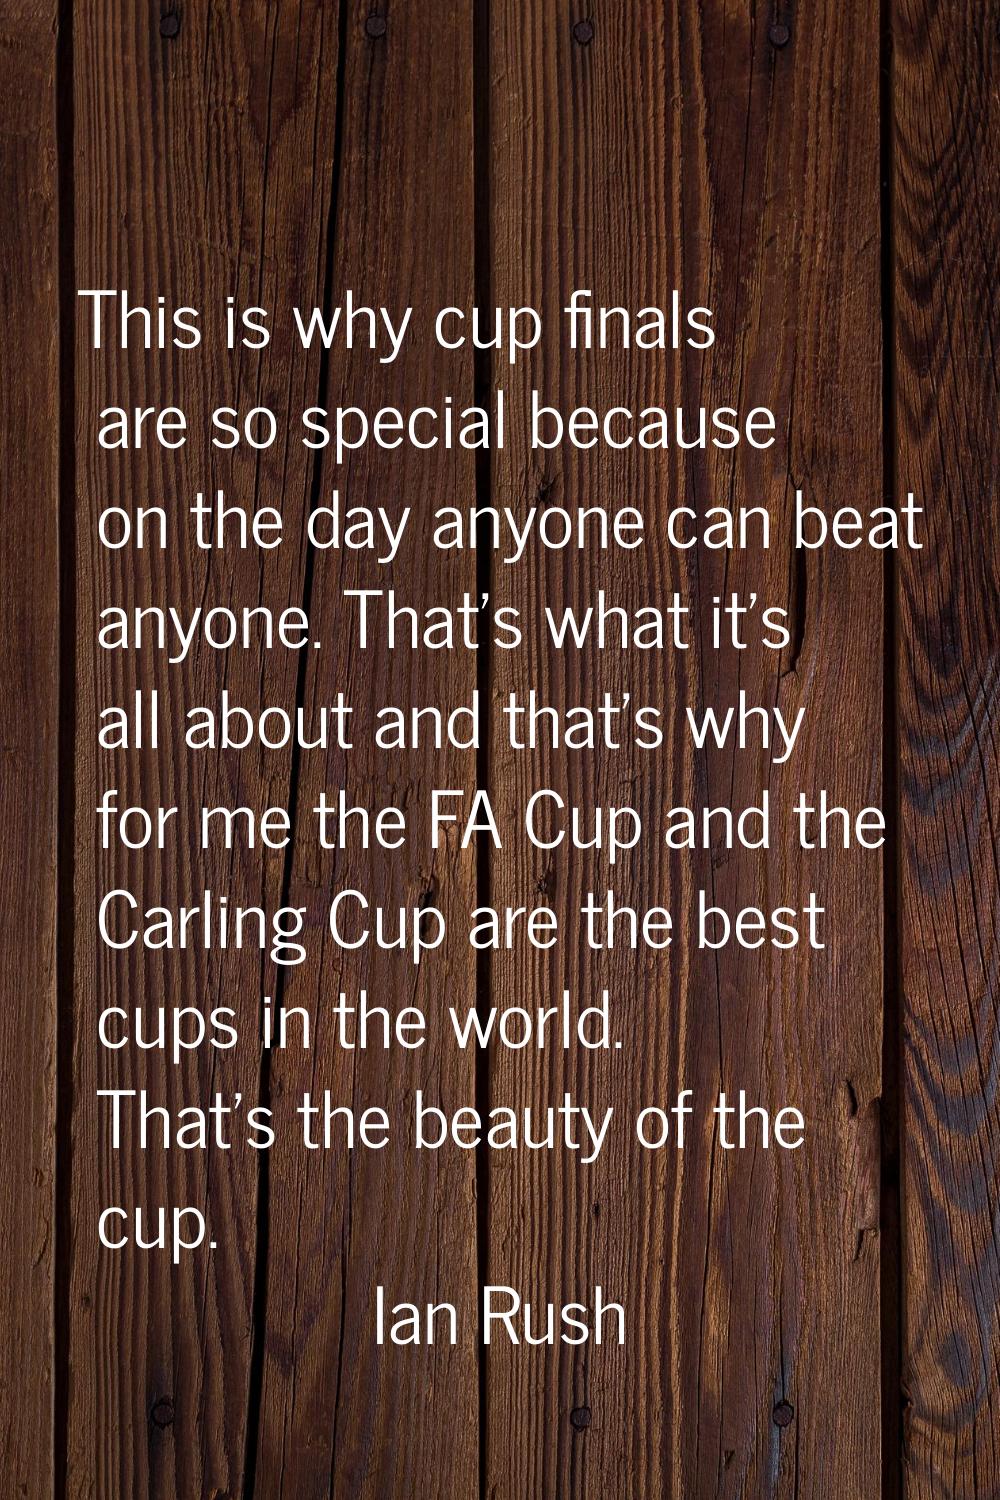 This is why cup finals are so special because on the day anyone can beat anyone. That's what it's a